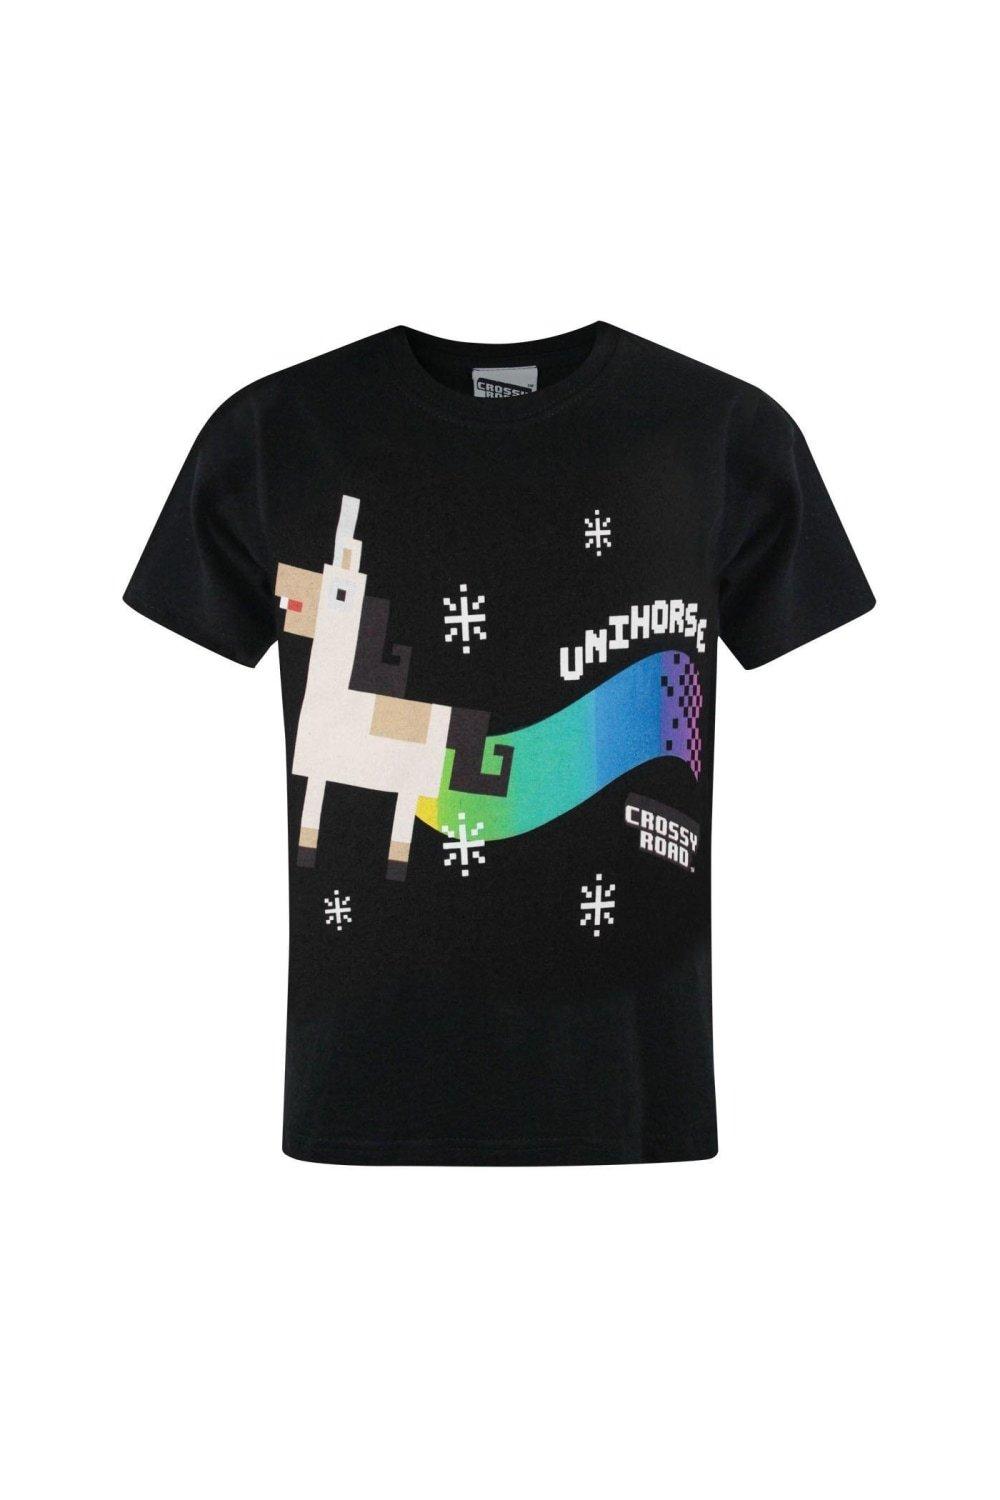 Crossy Road Official Unihorse T-Shirt